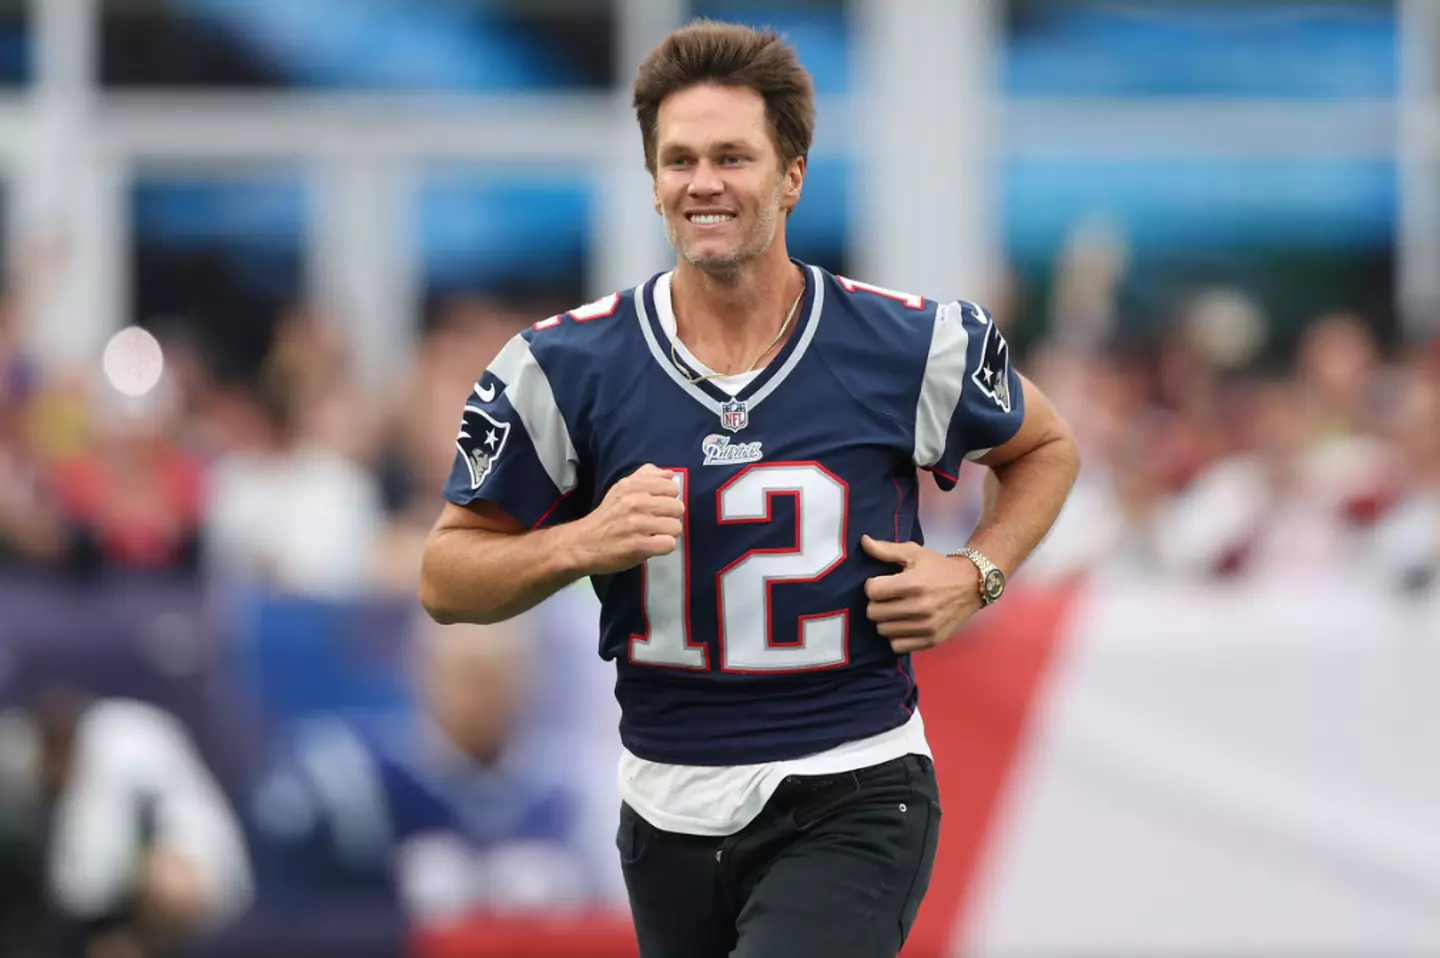 Tom Brady announced his retirement 'for good' earlier this year.